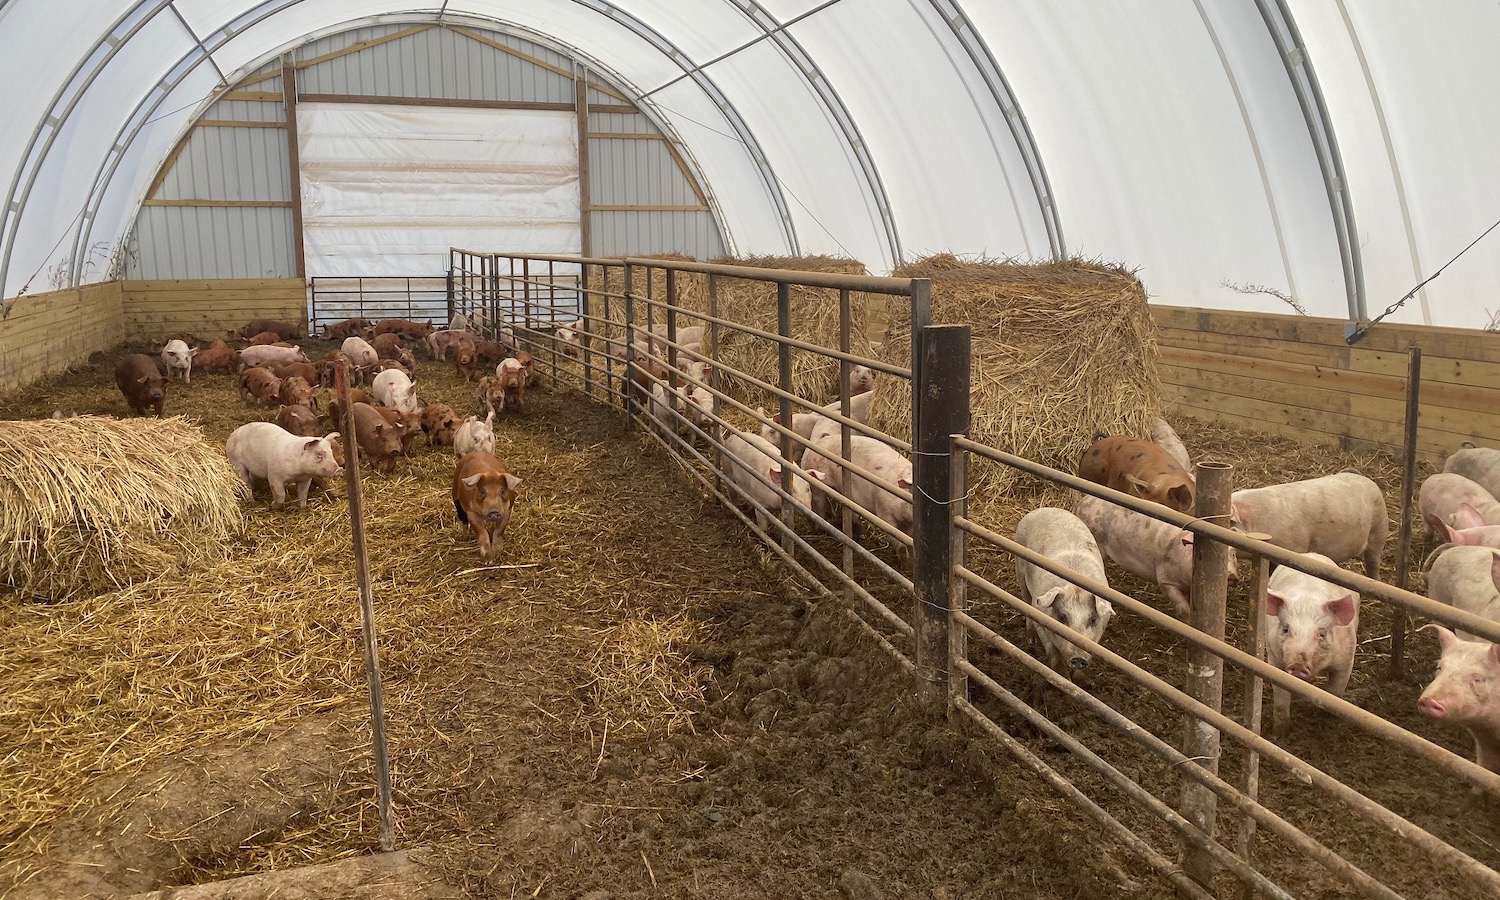 The Next Generation of Hog Farming: "I’d Rather Be the Best Farmer tha...